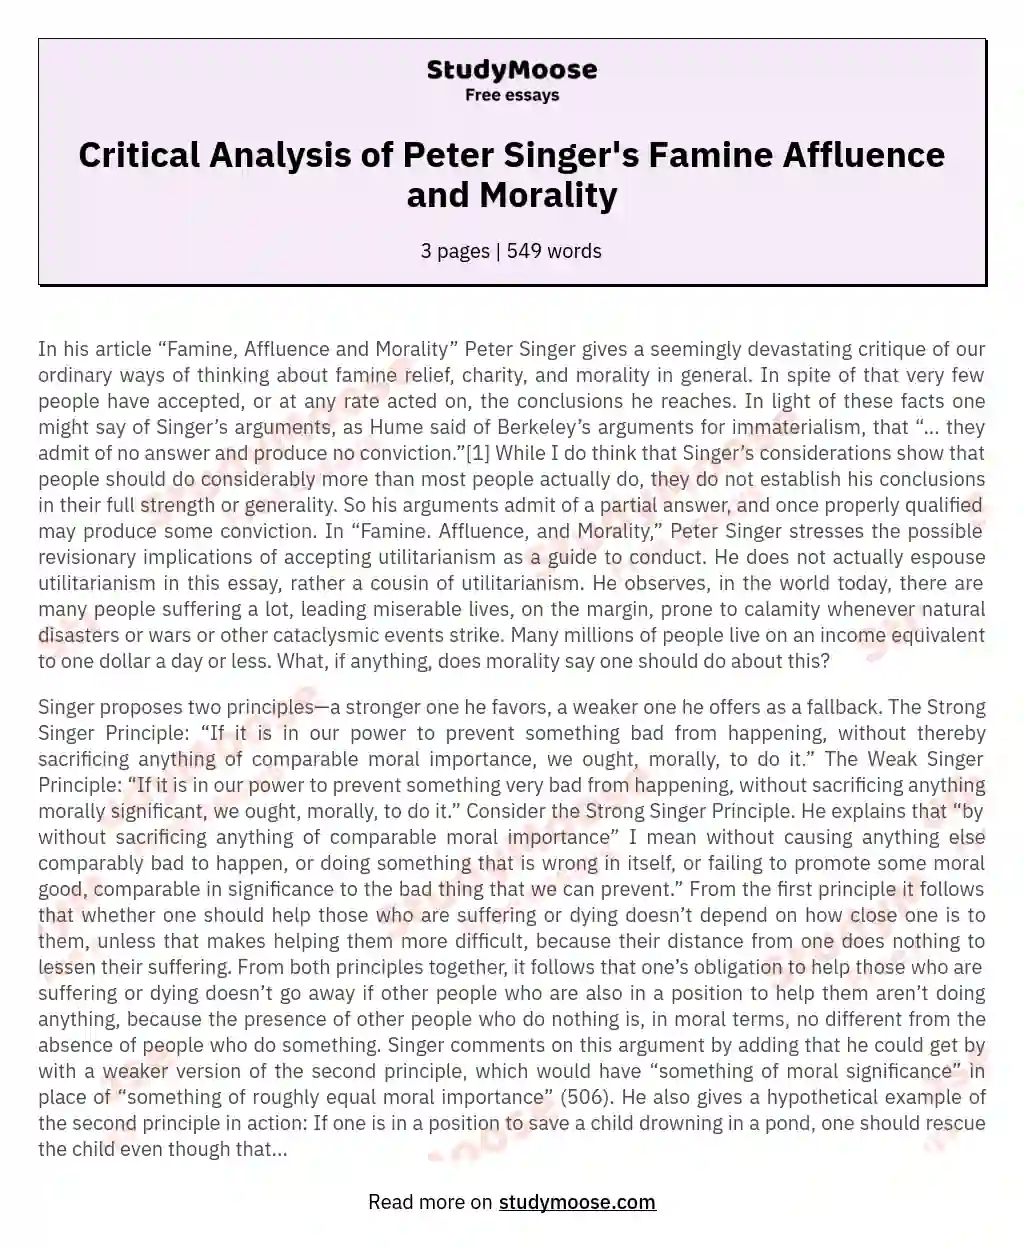 Critical Analysis of Peter Singer's Famine Affluence and Morality